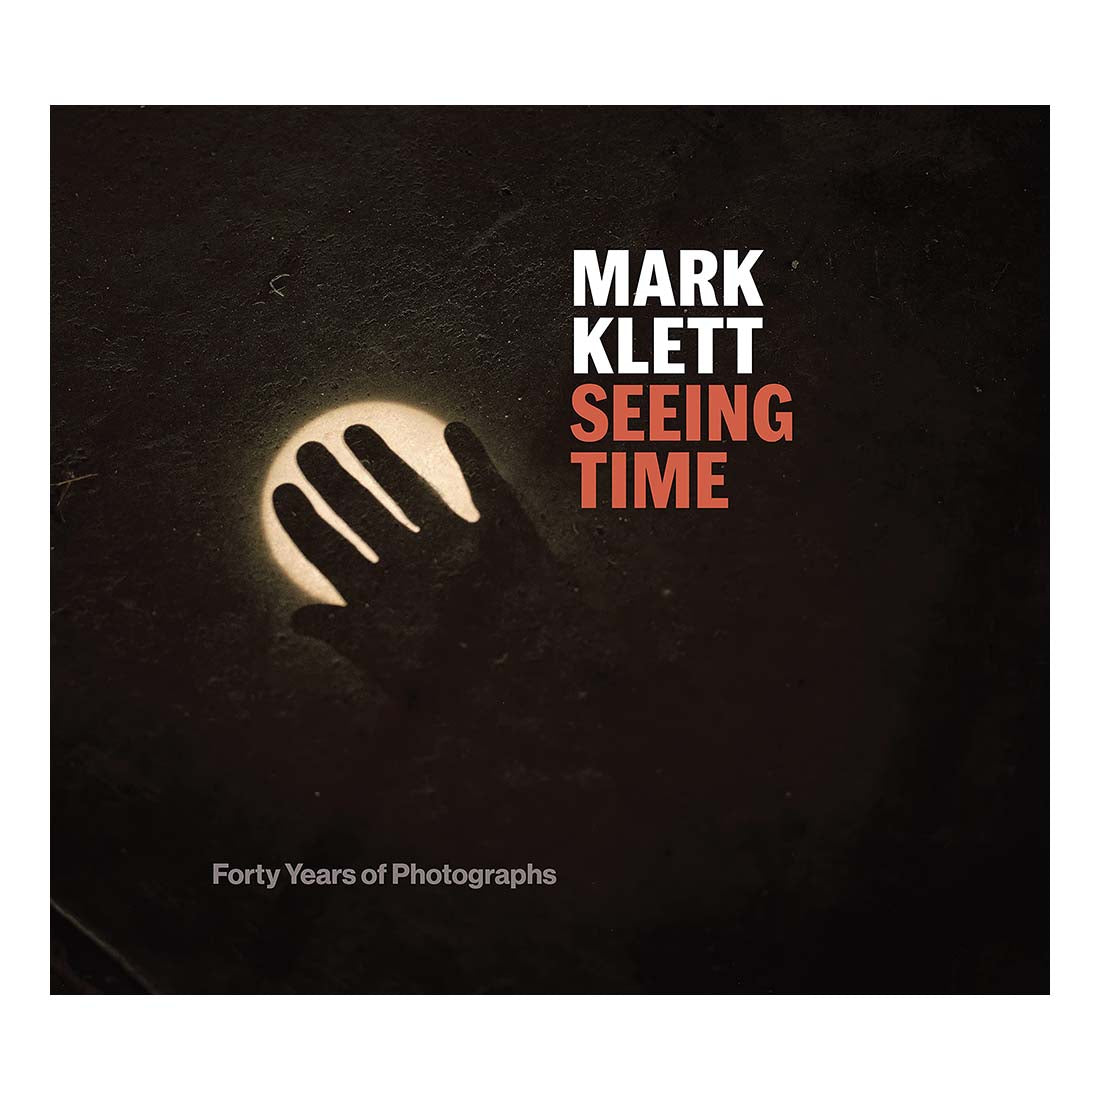 Mark Klett Seeing Time: Forty Years of Photographs